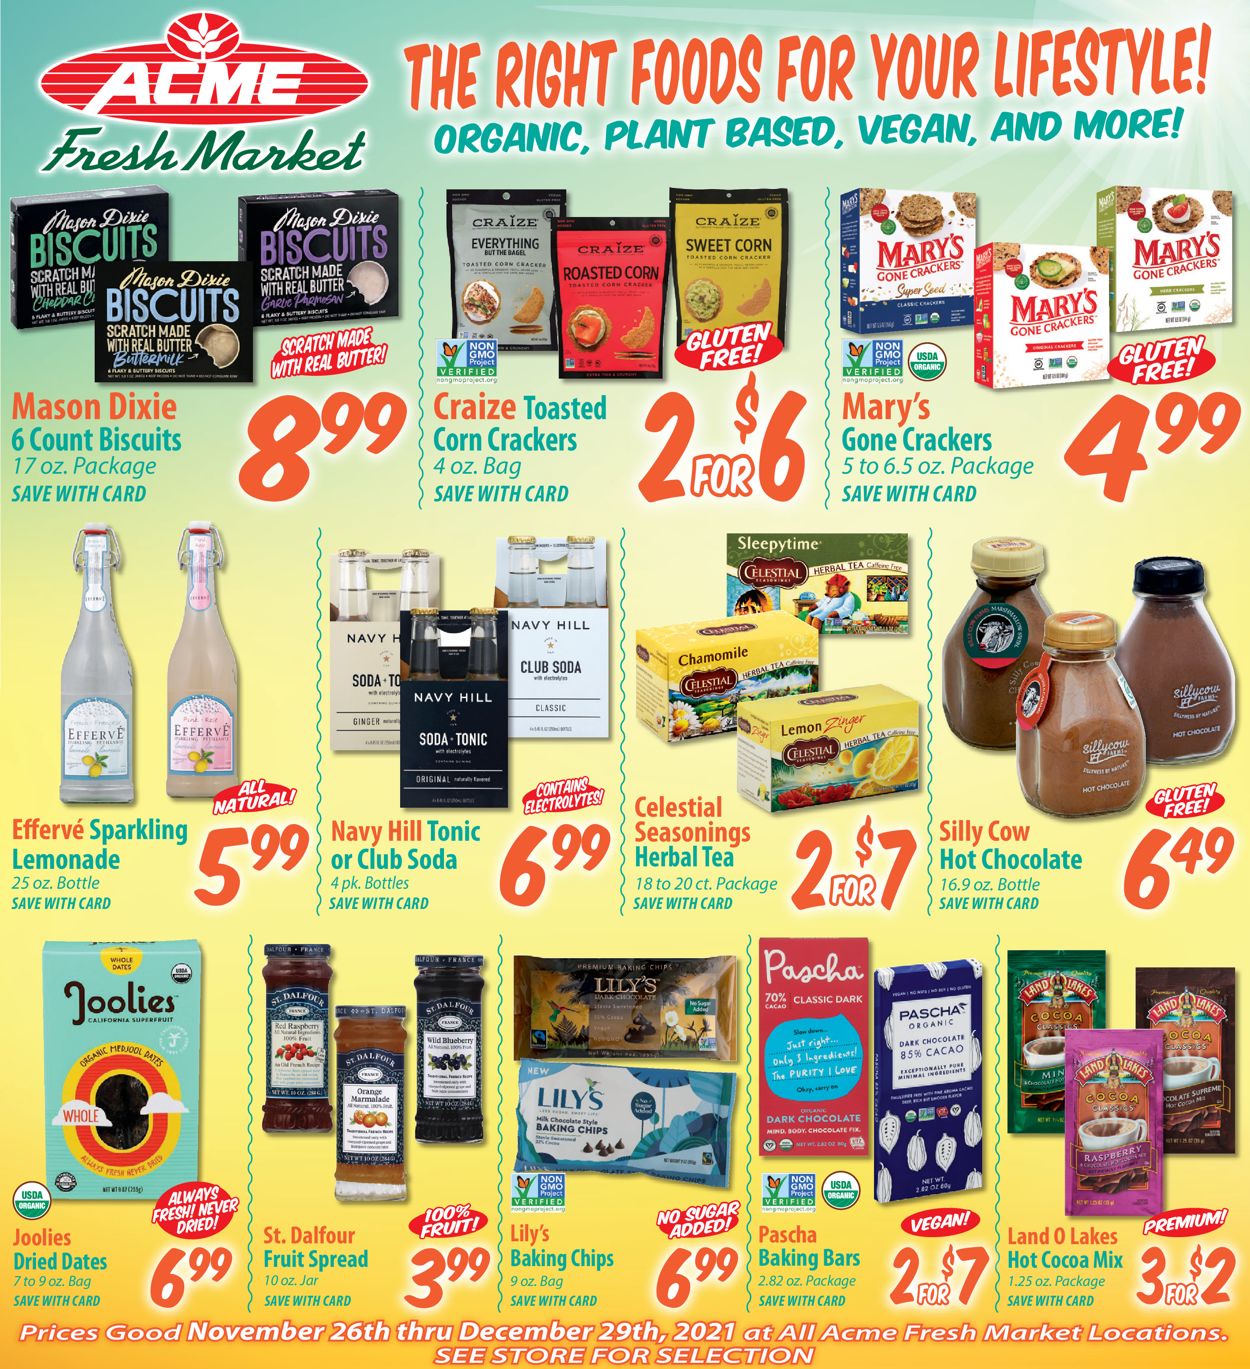 Acme Fresh Market CHRISTMAS 2021 Current weekly ad 12/23 12/29/2021